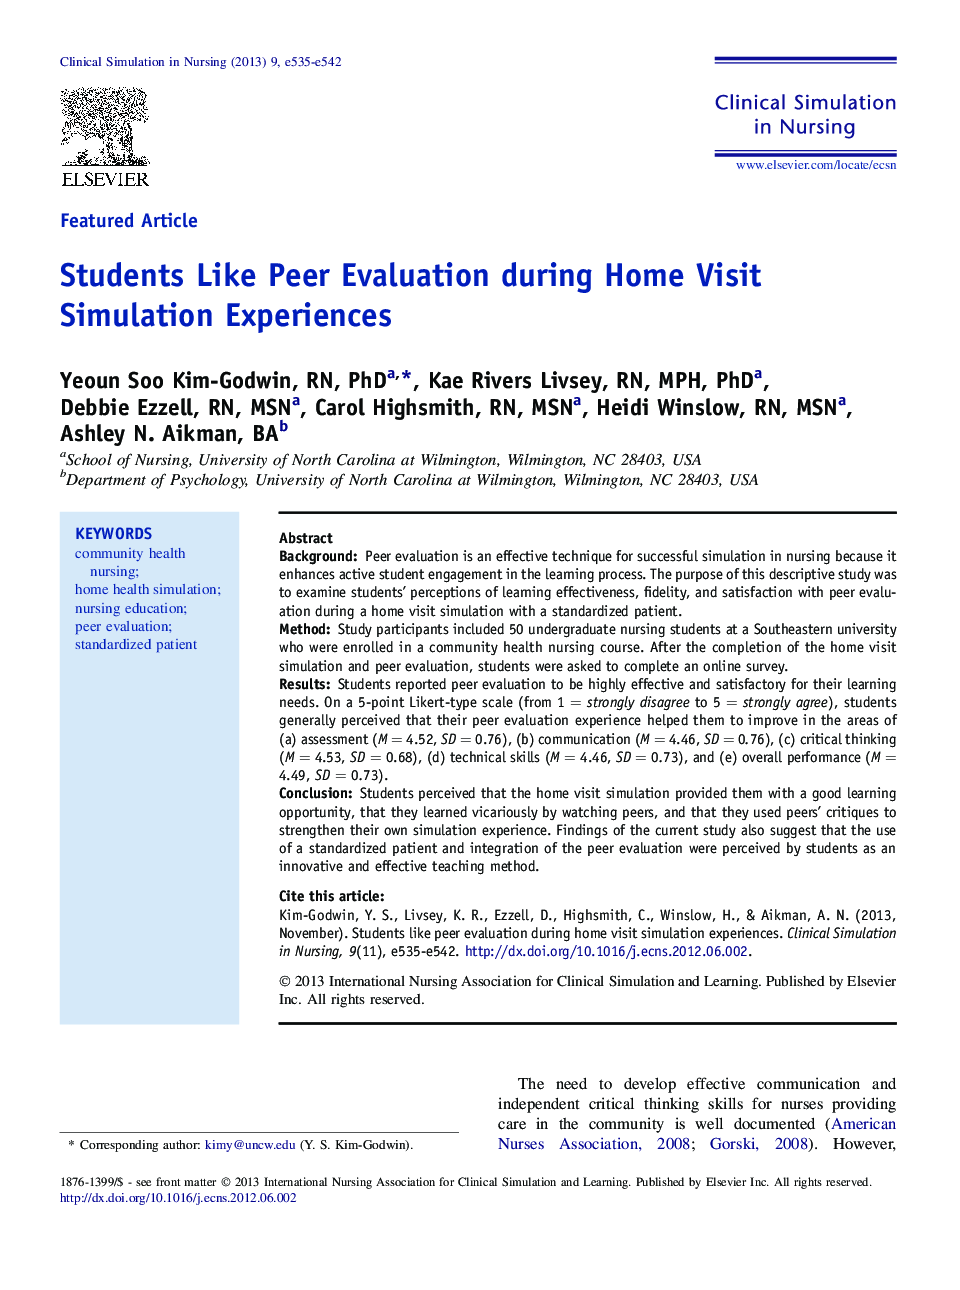 Students Like Peer Evaluation during Home Visit Simulation Experiences